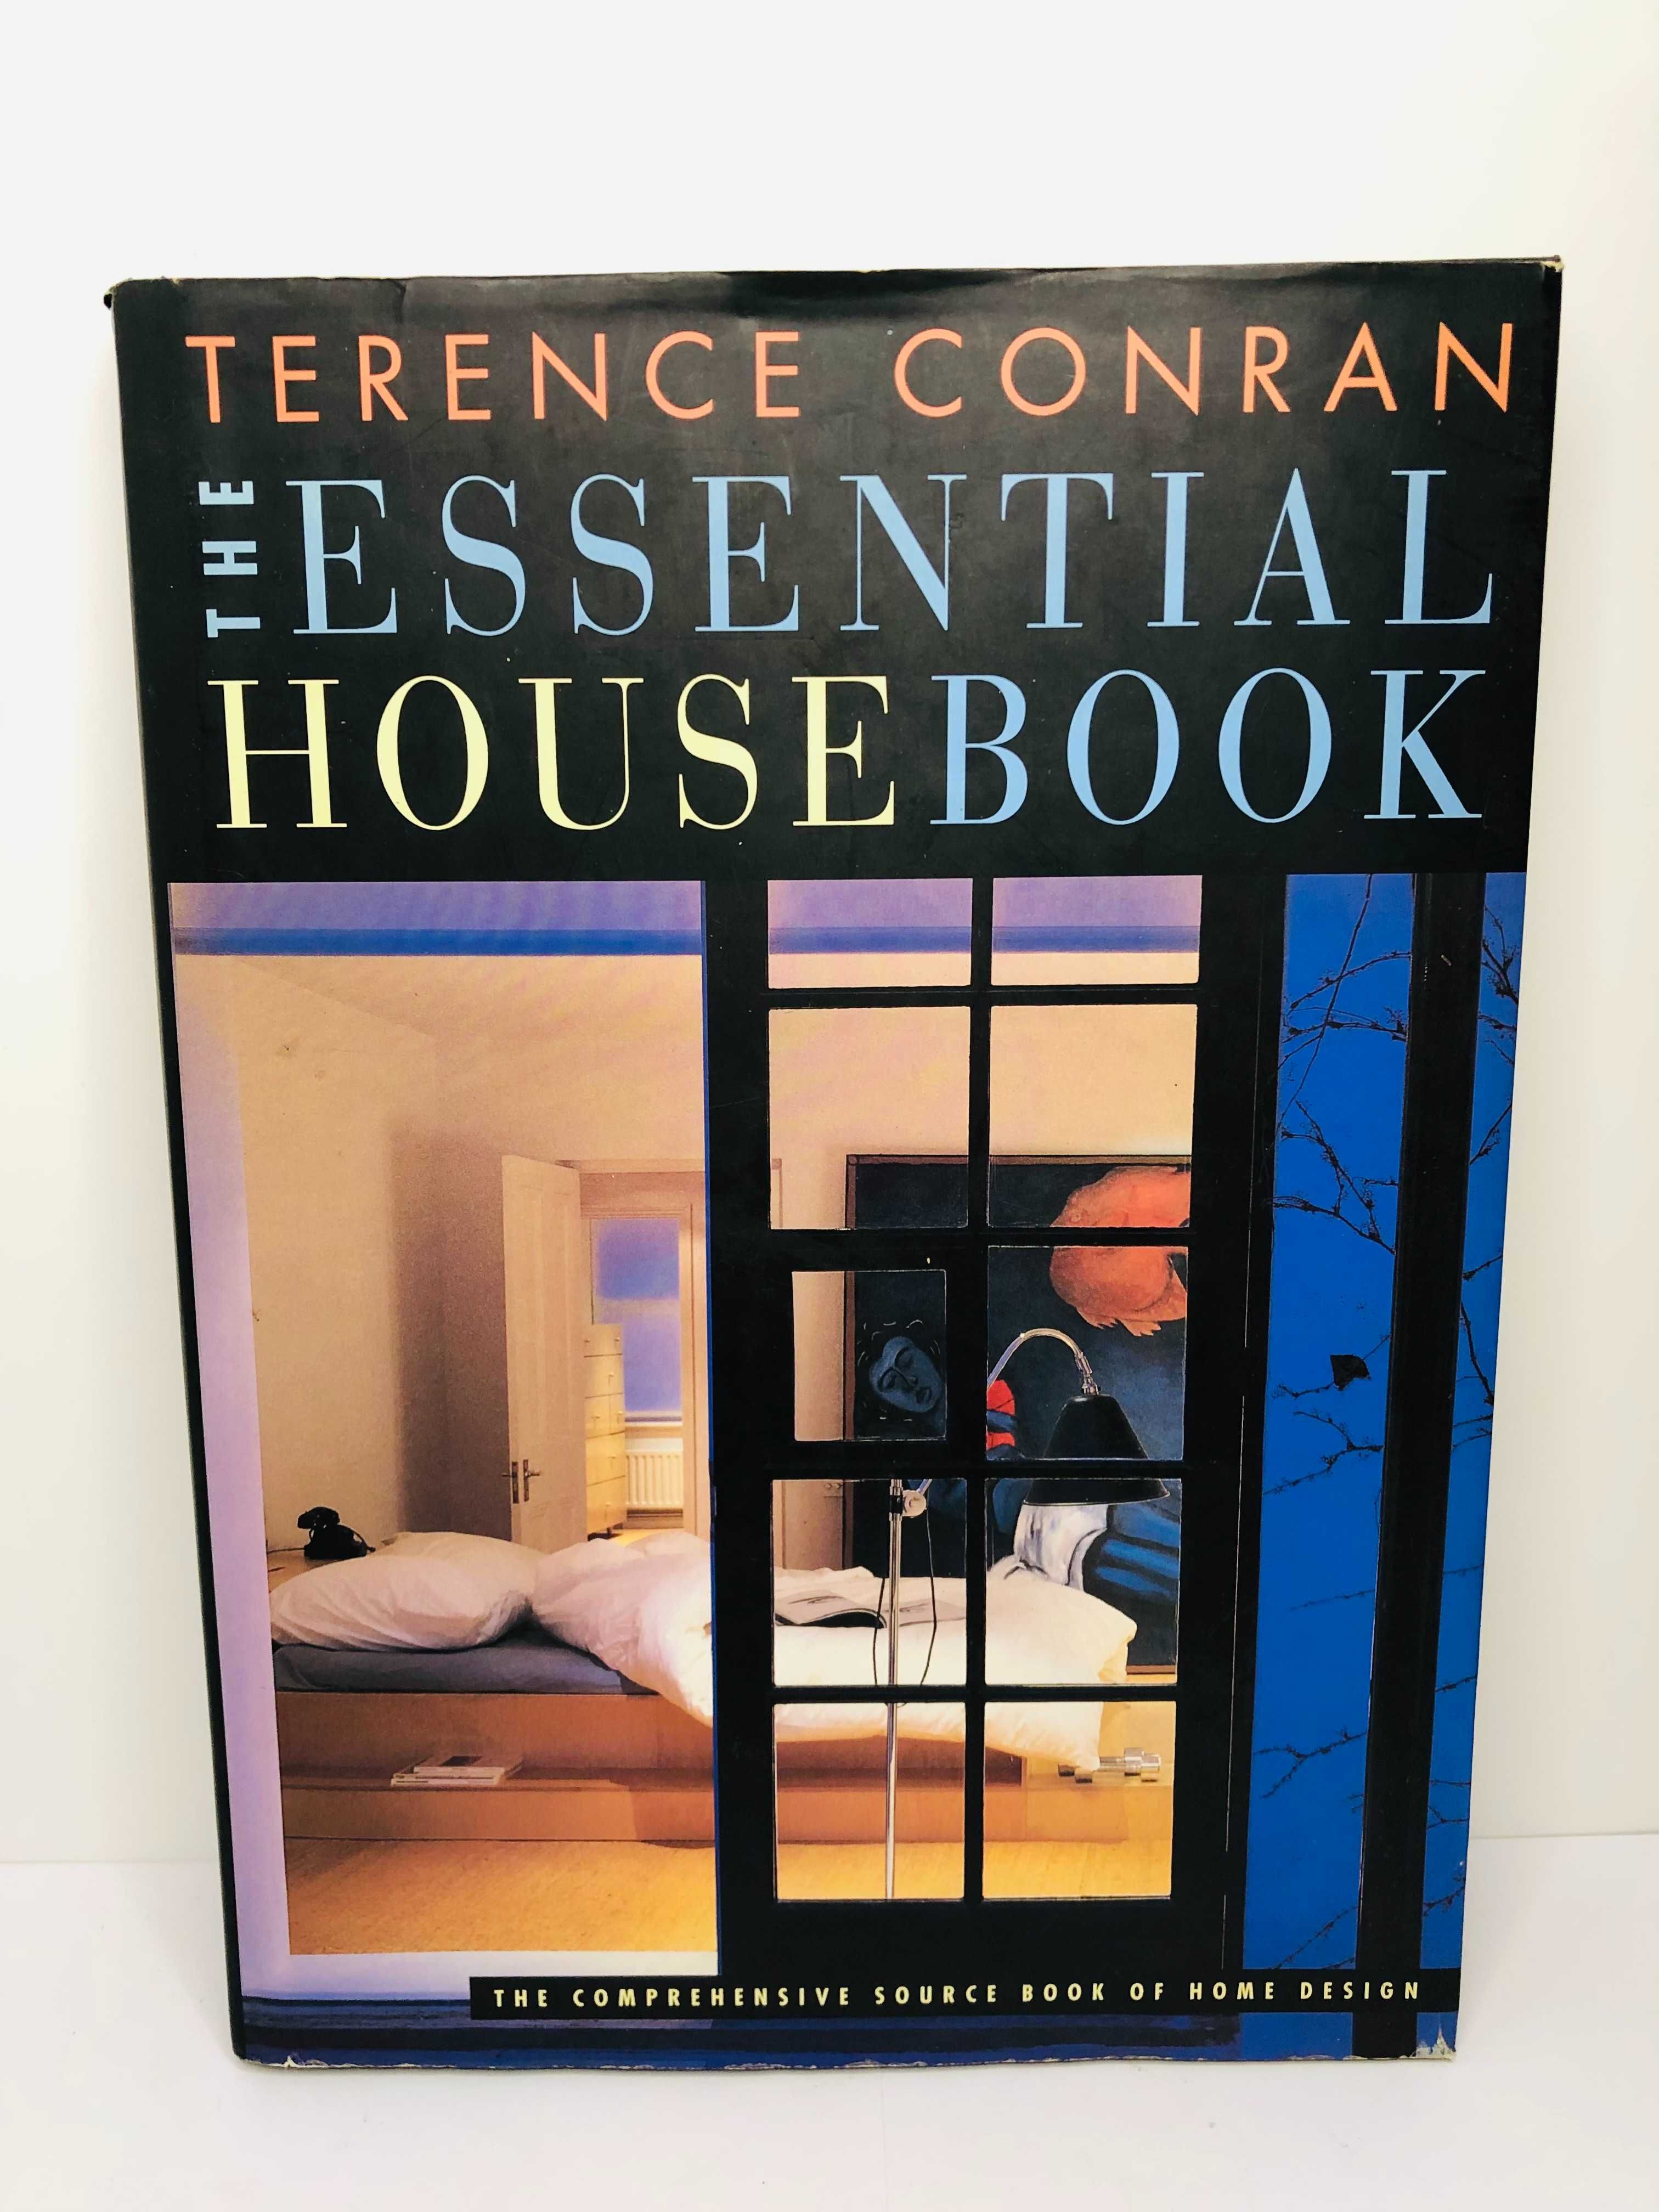 The Essential House Book - Terence Conran